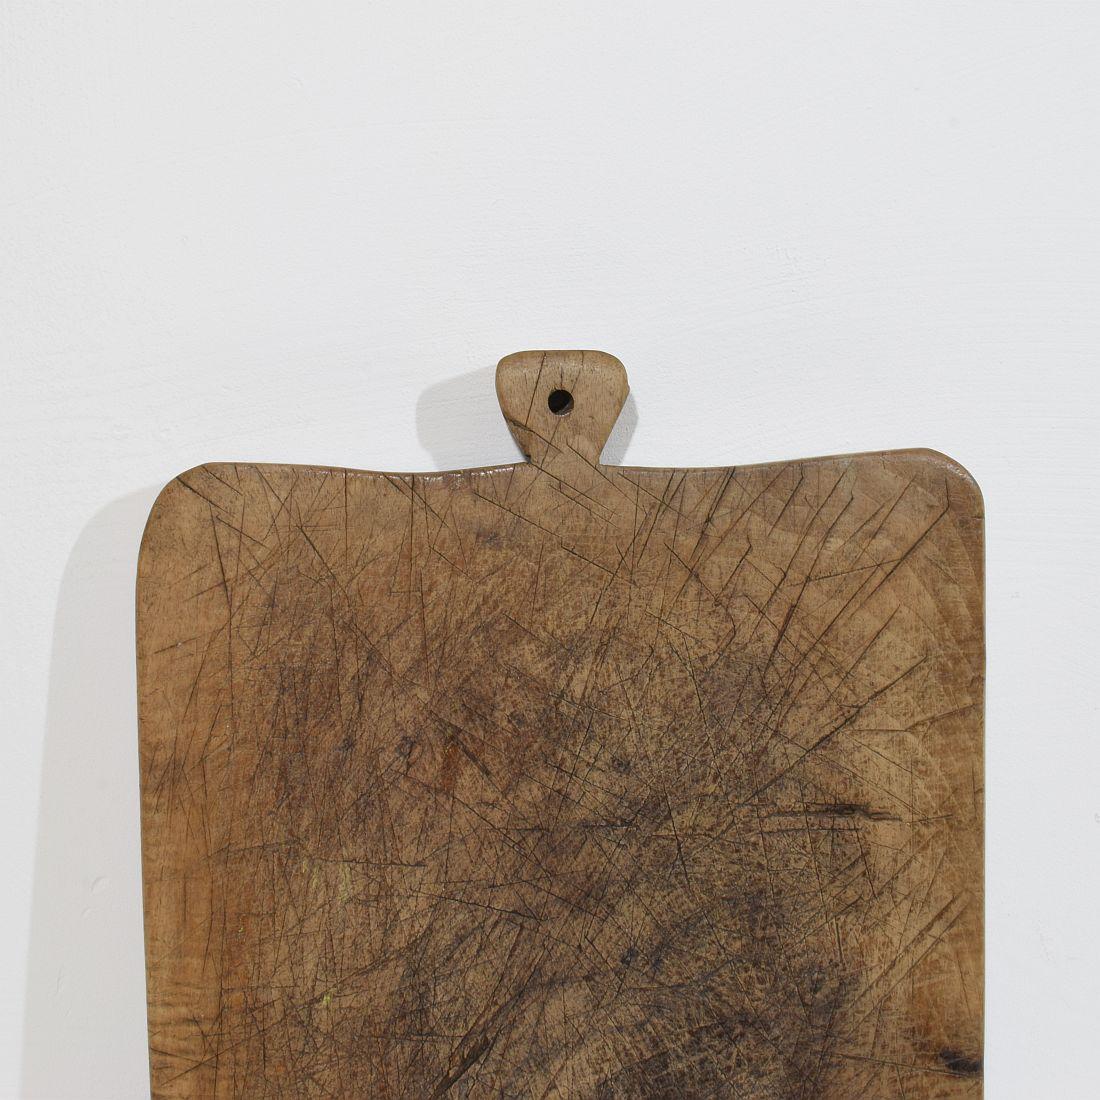 French 19th Century, Thick Wooden Chopping or Cutting Board For Sale 3